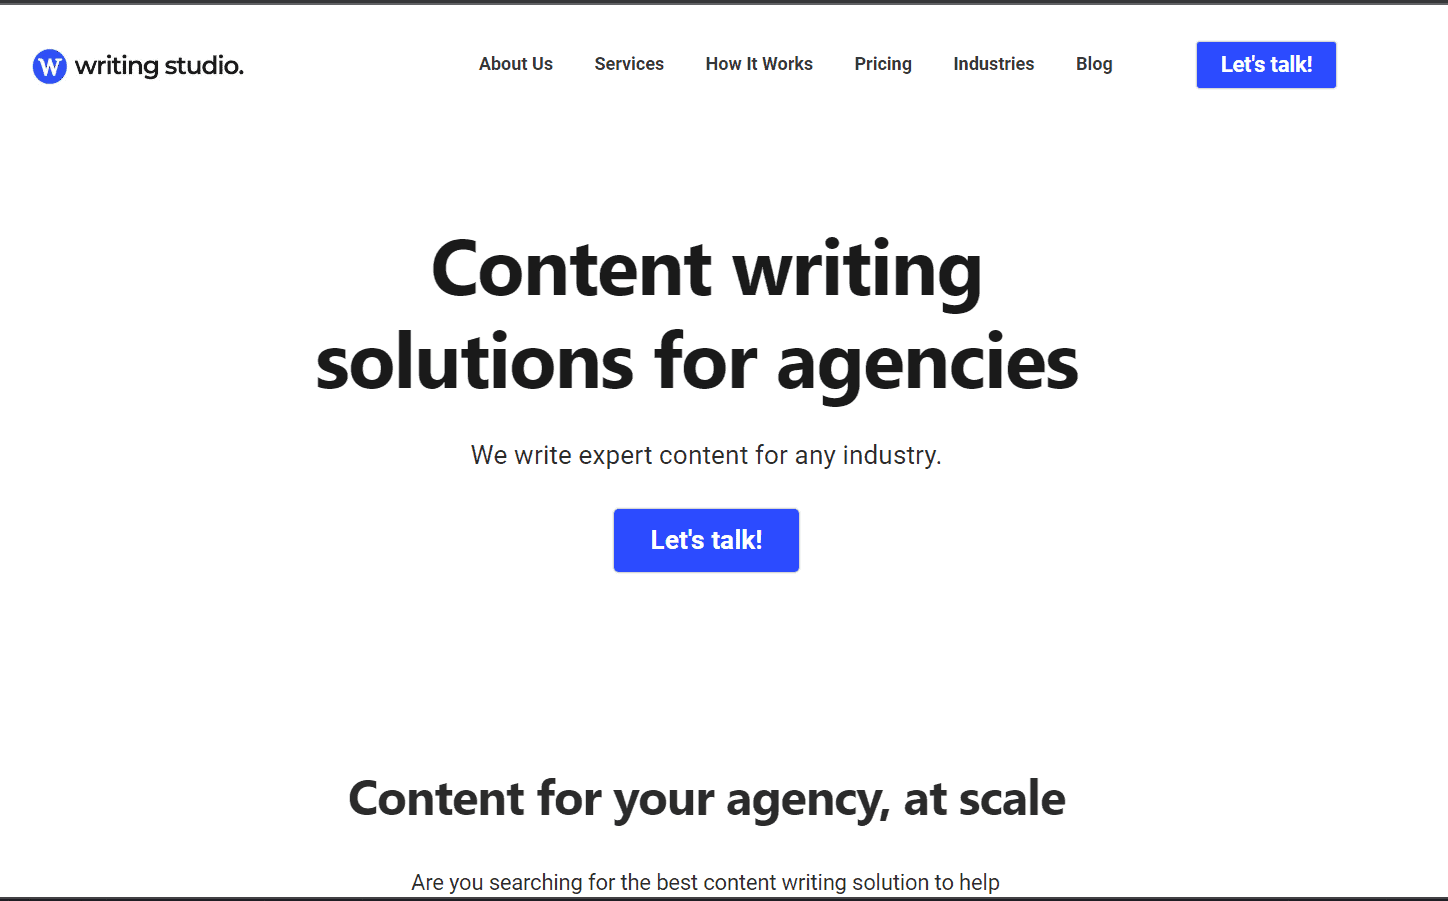 Writing Studio White Label Content Writing Services